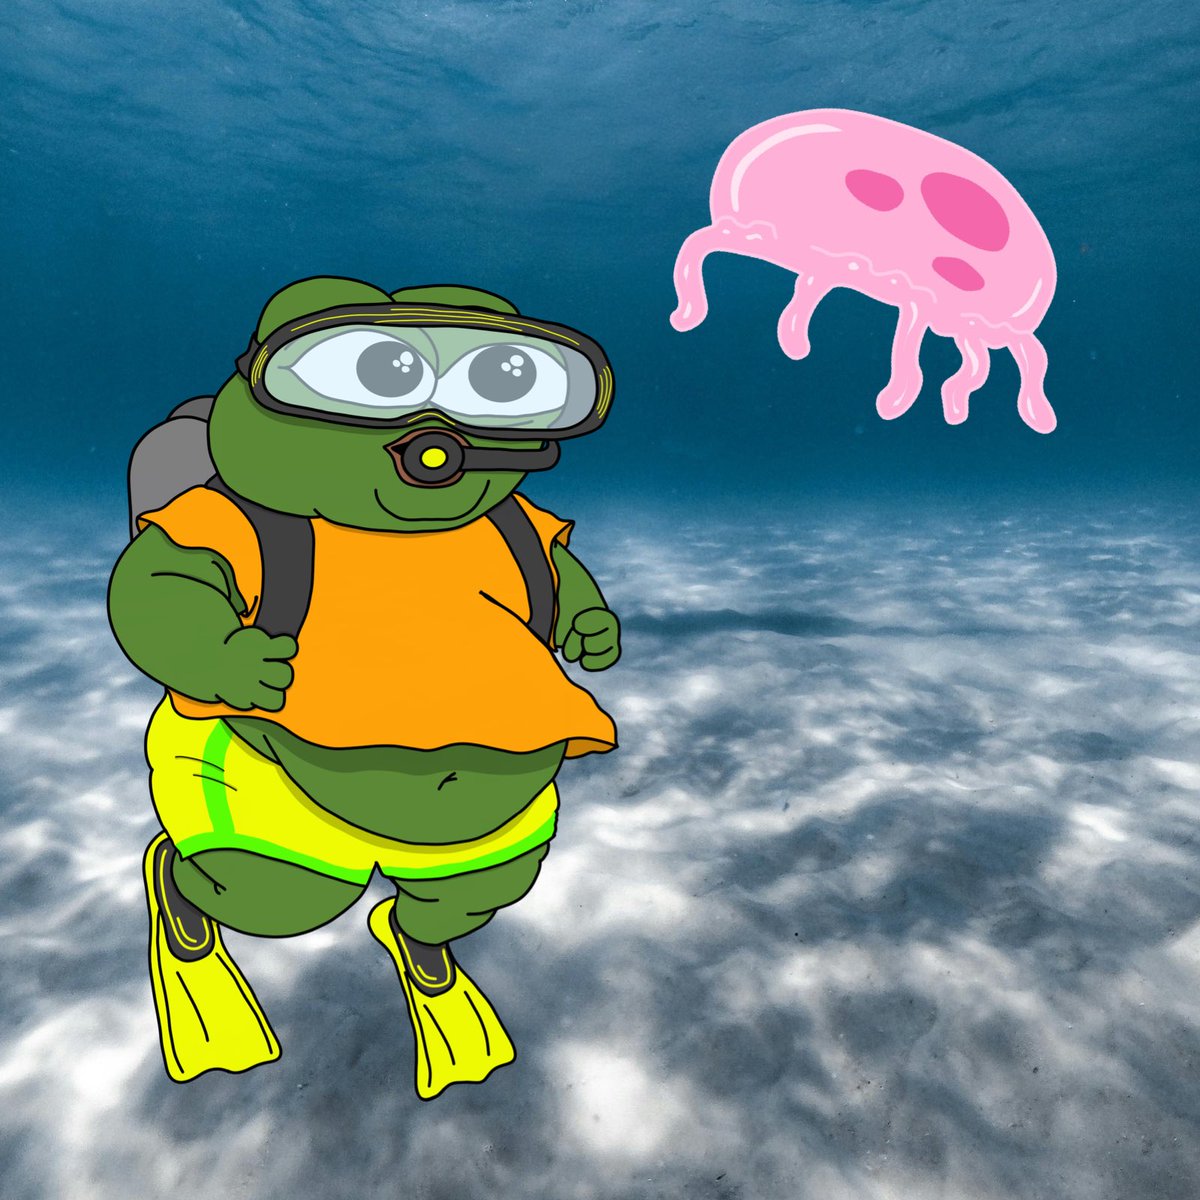 are u jellyfish maxxing anon (𝕡𝕒𝕣𝕥 𝟚)
(i drew a frenly chonky scuba diver)